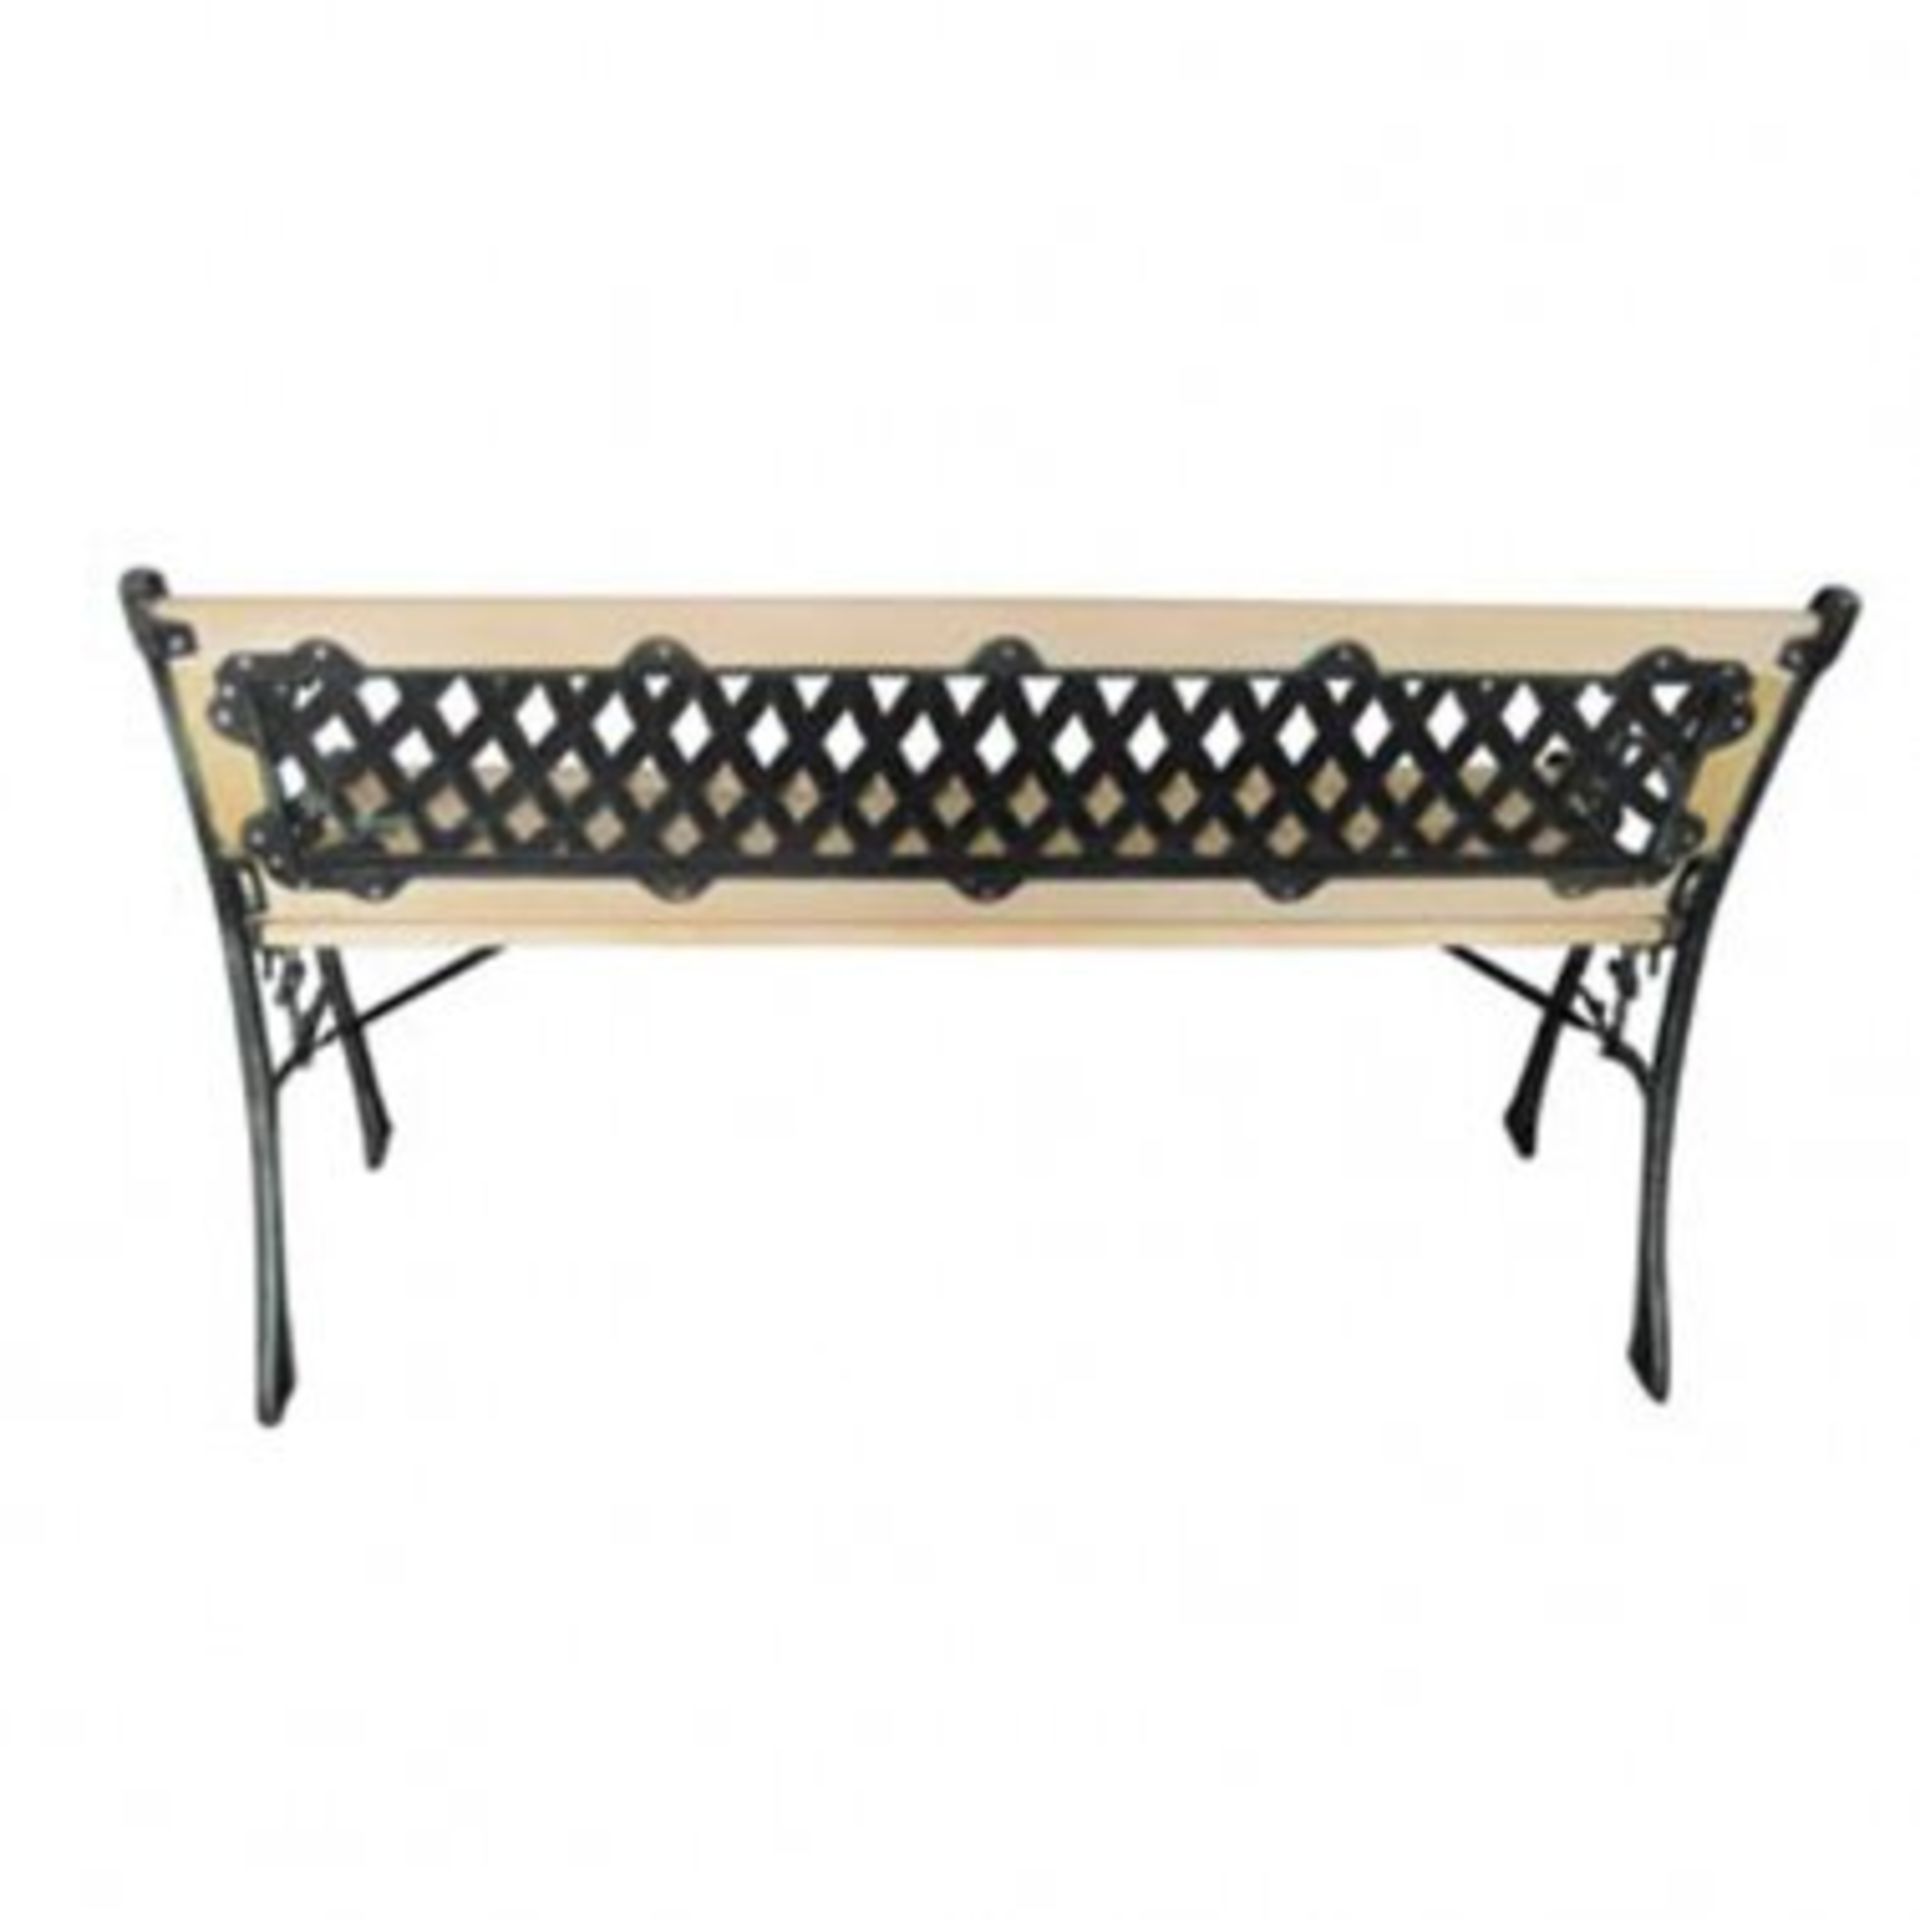 Wooden Bench - RRP £84.99 - Image 2 of 2